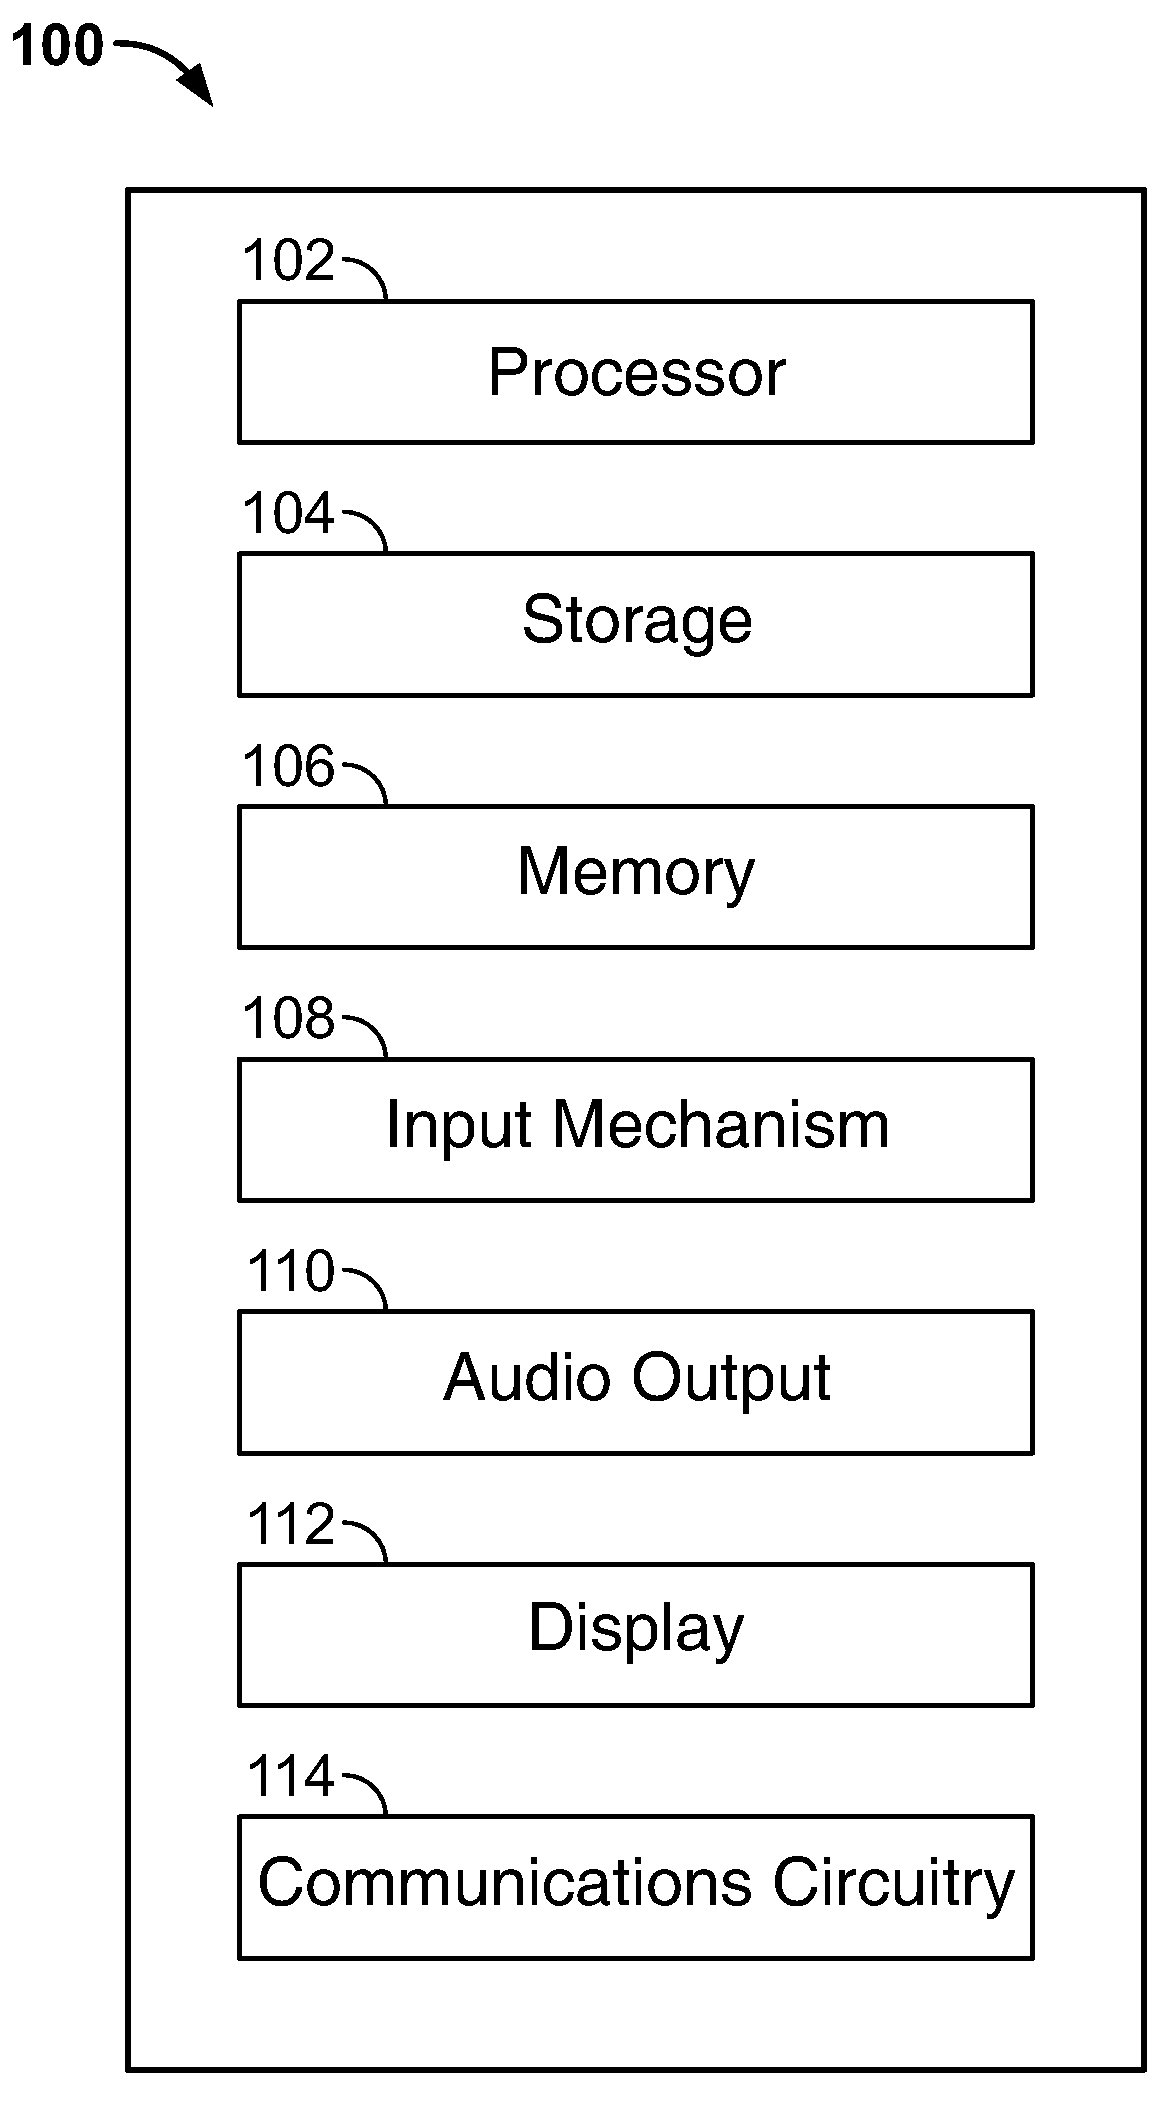 Multi-tiered voice feedback in an electronic device